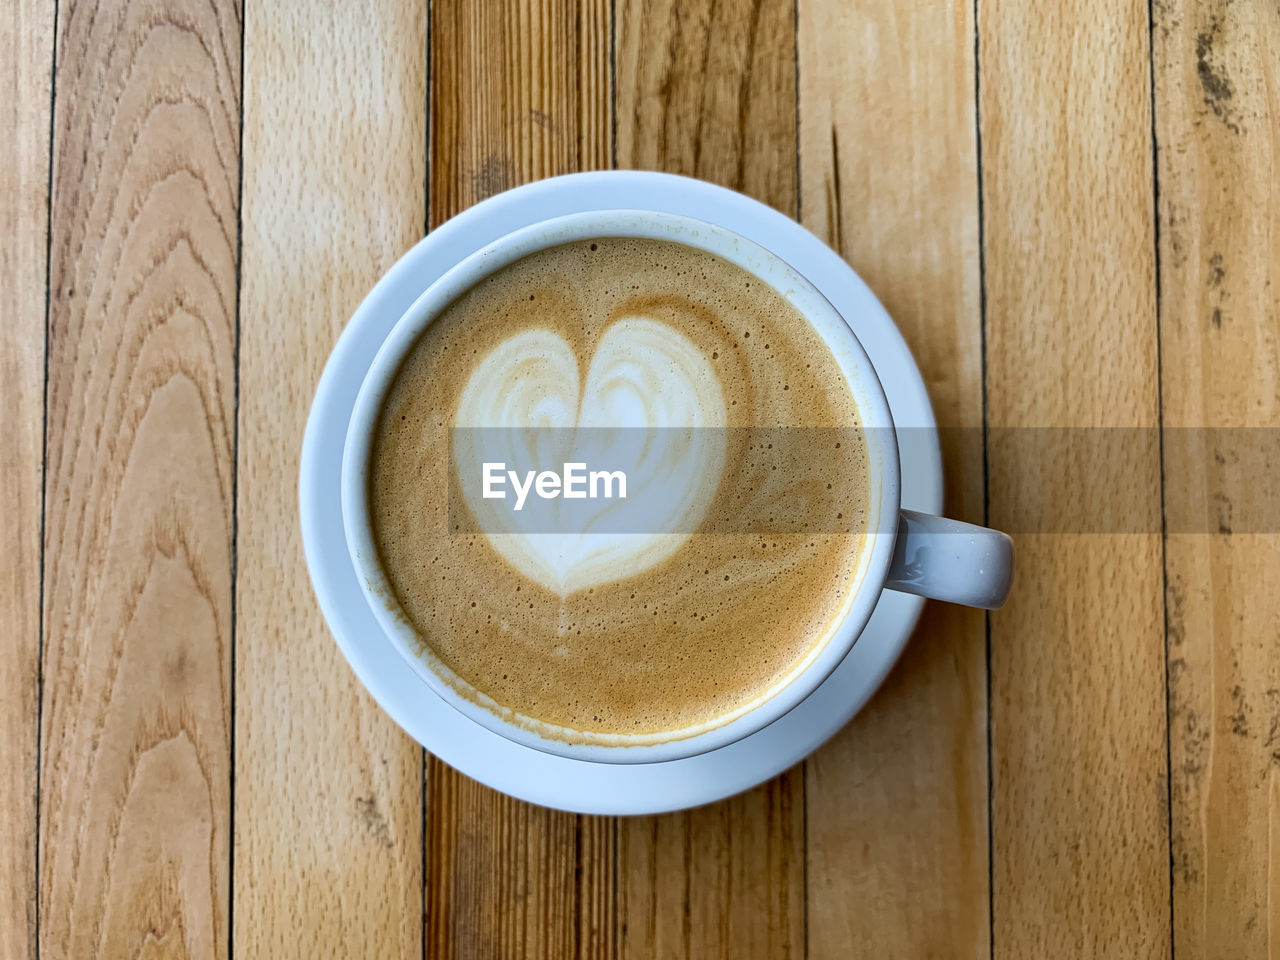 A cup of coffee latte on a wooden table. a mug of flat white coffee on a wooden background. coffee